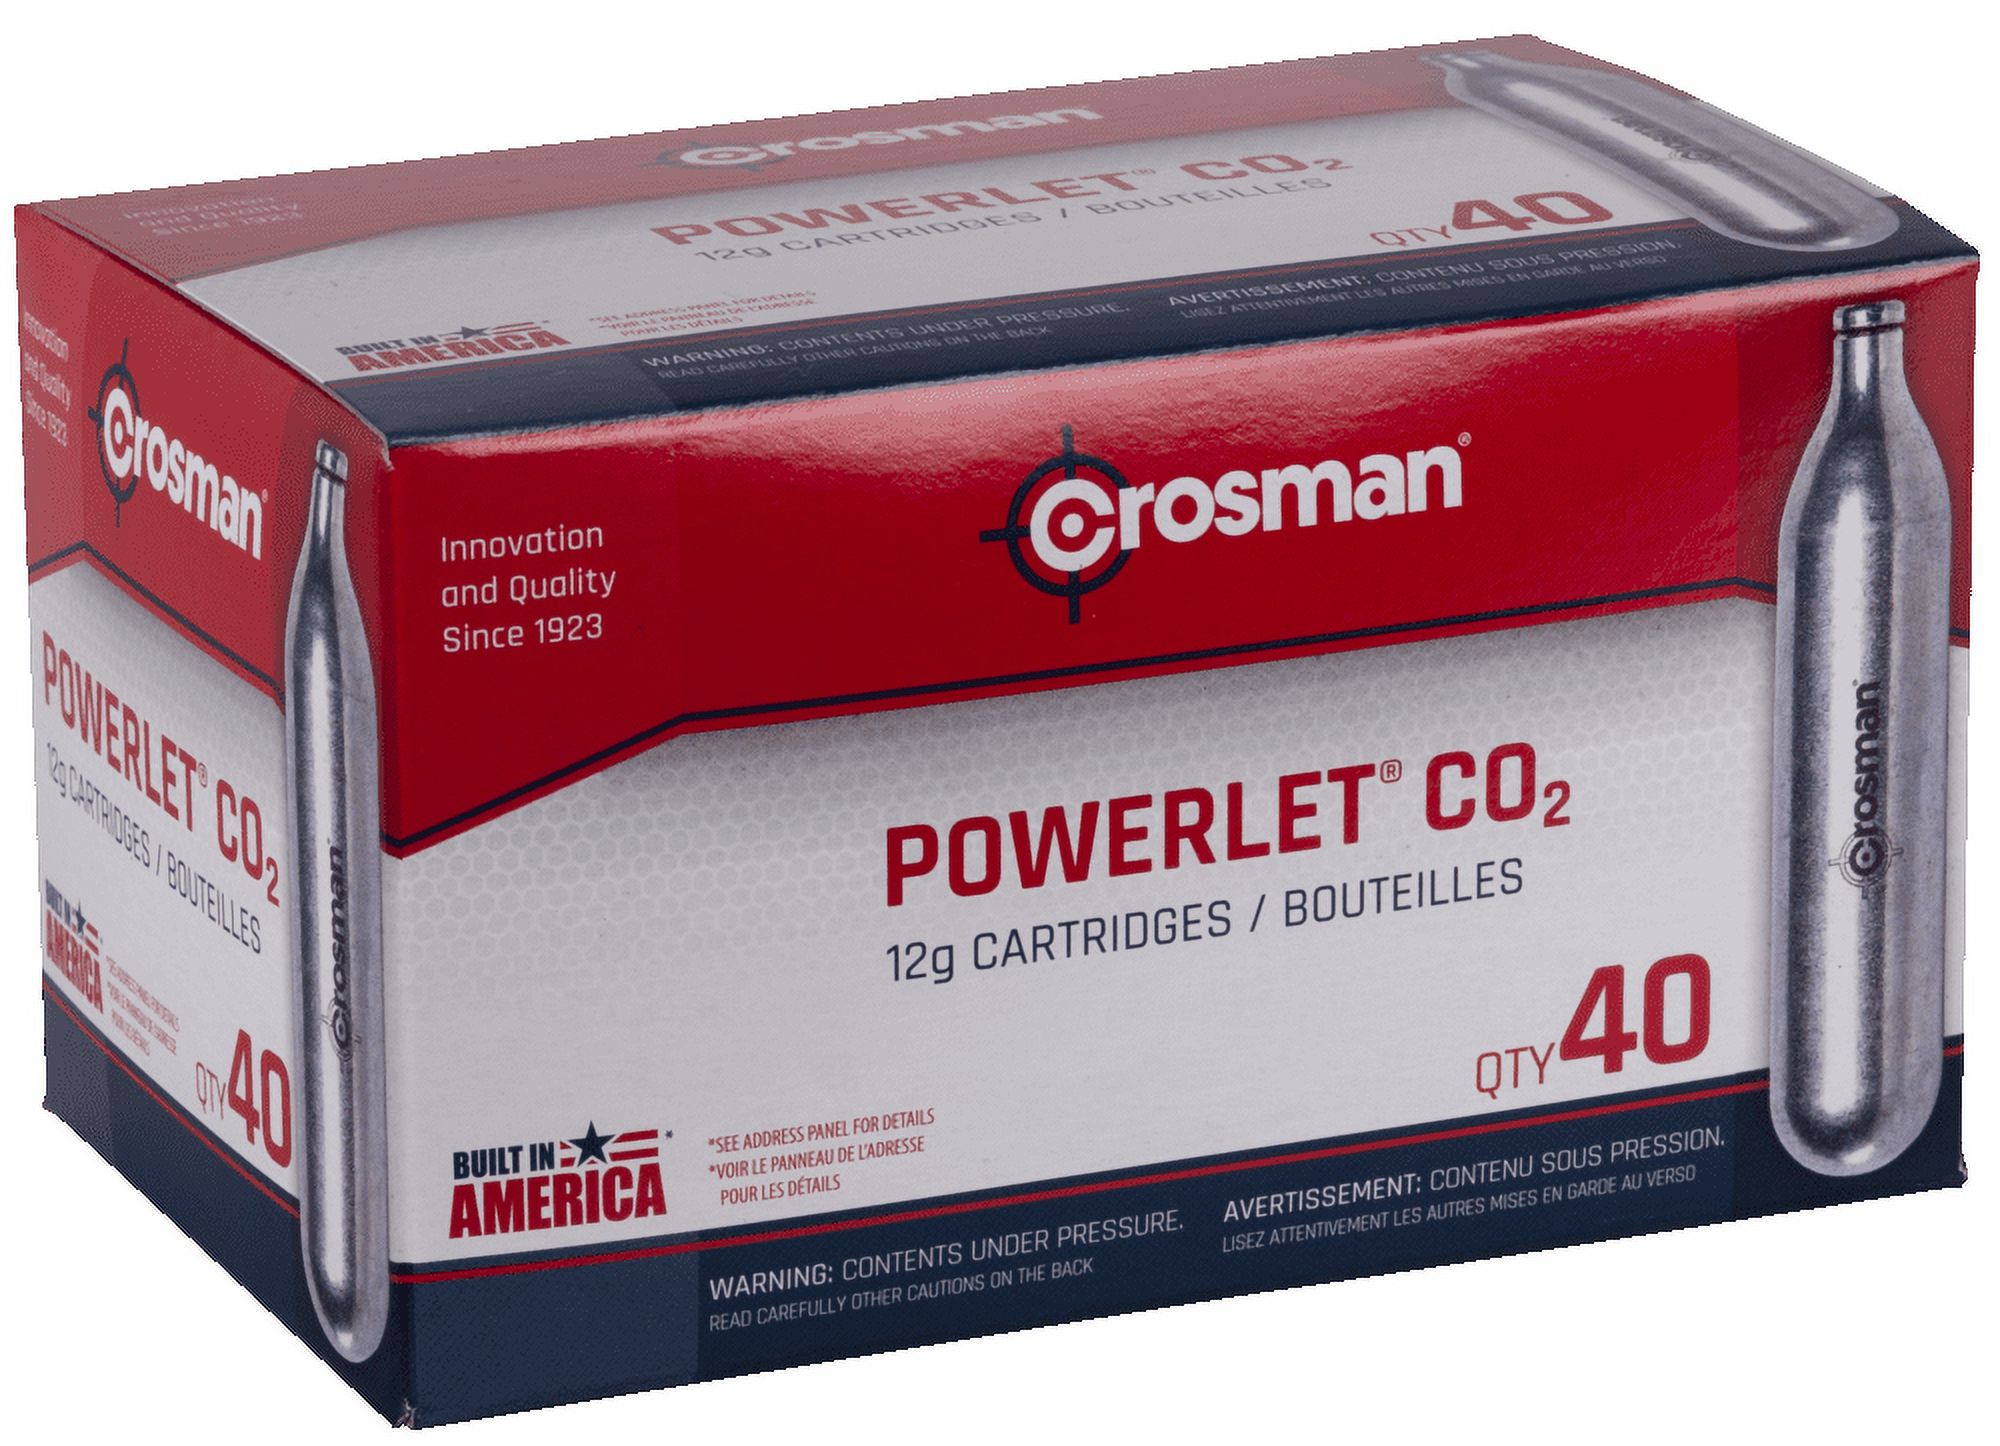 Crosman 12 Gram Co2 Powerlets, 40ct, for Use with Paintball, Air Soft or Air Rifles - image 2 of 4